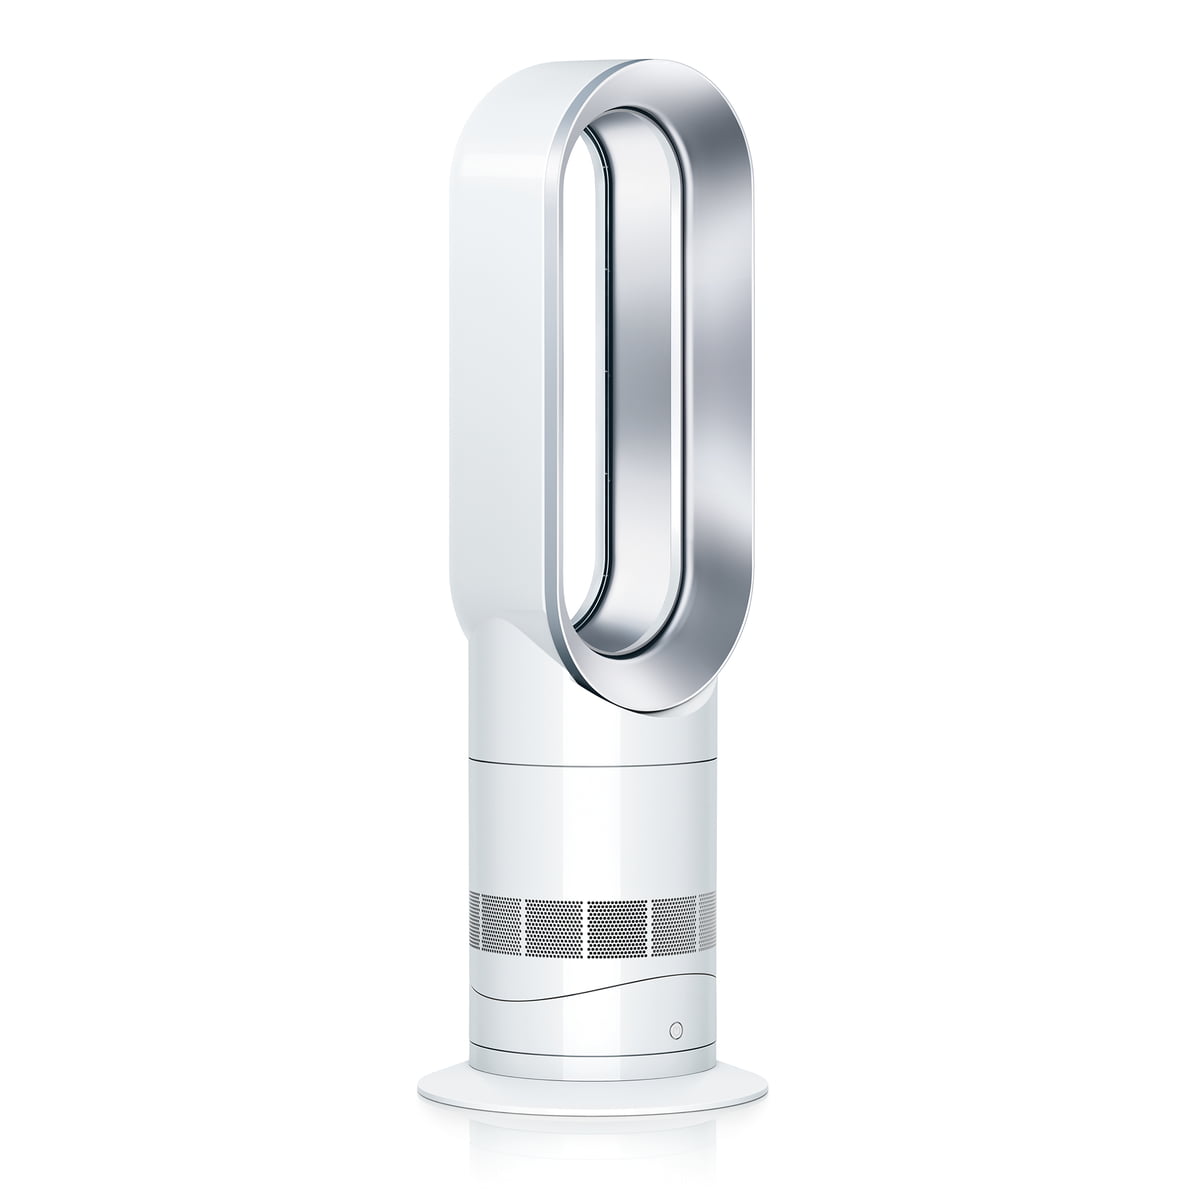 Buy AM09 Hot + Cool by Dyson online